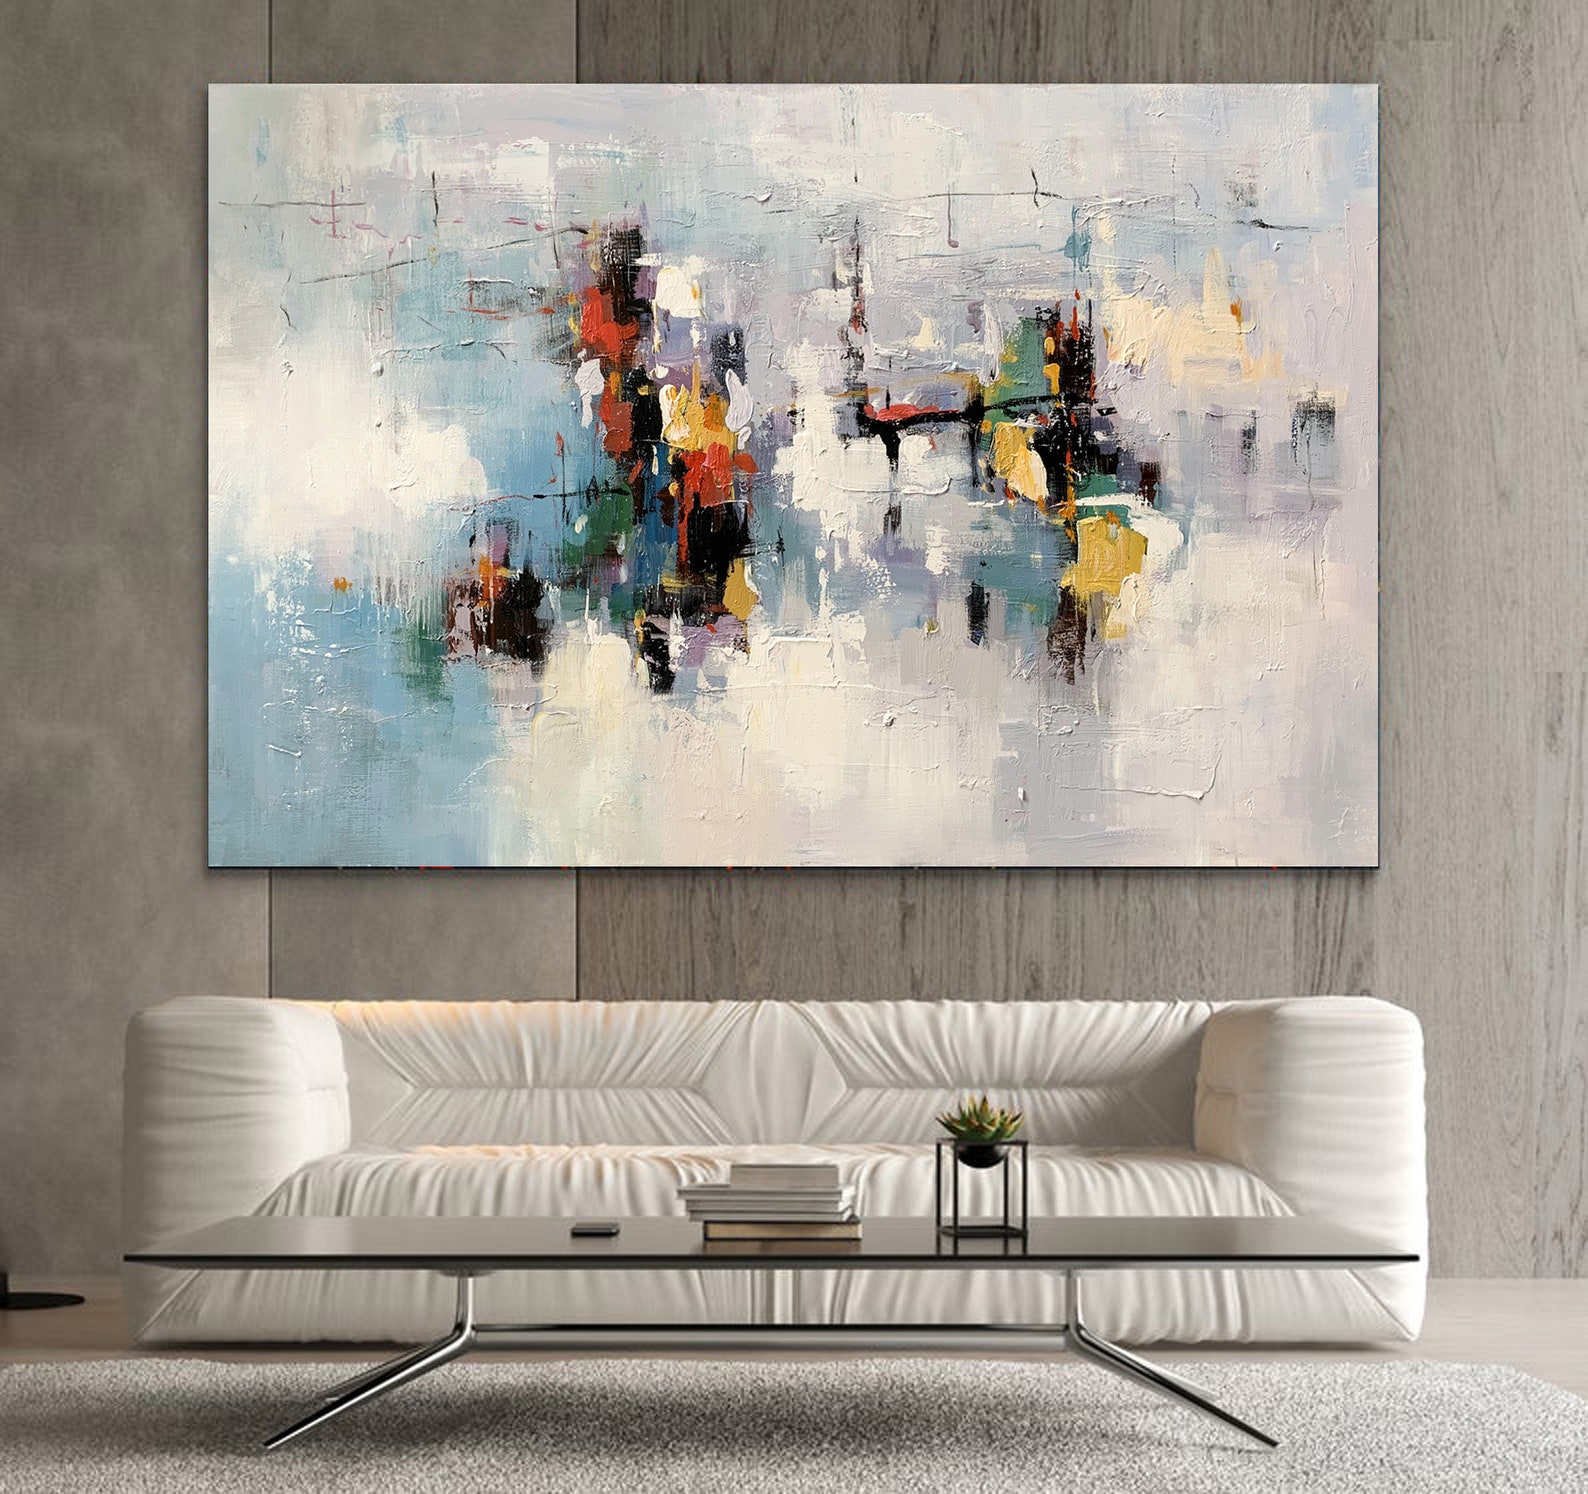 Large Modern Wall Art Painting Large Abstract Wall | Etsy